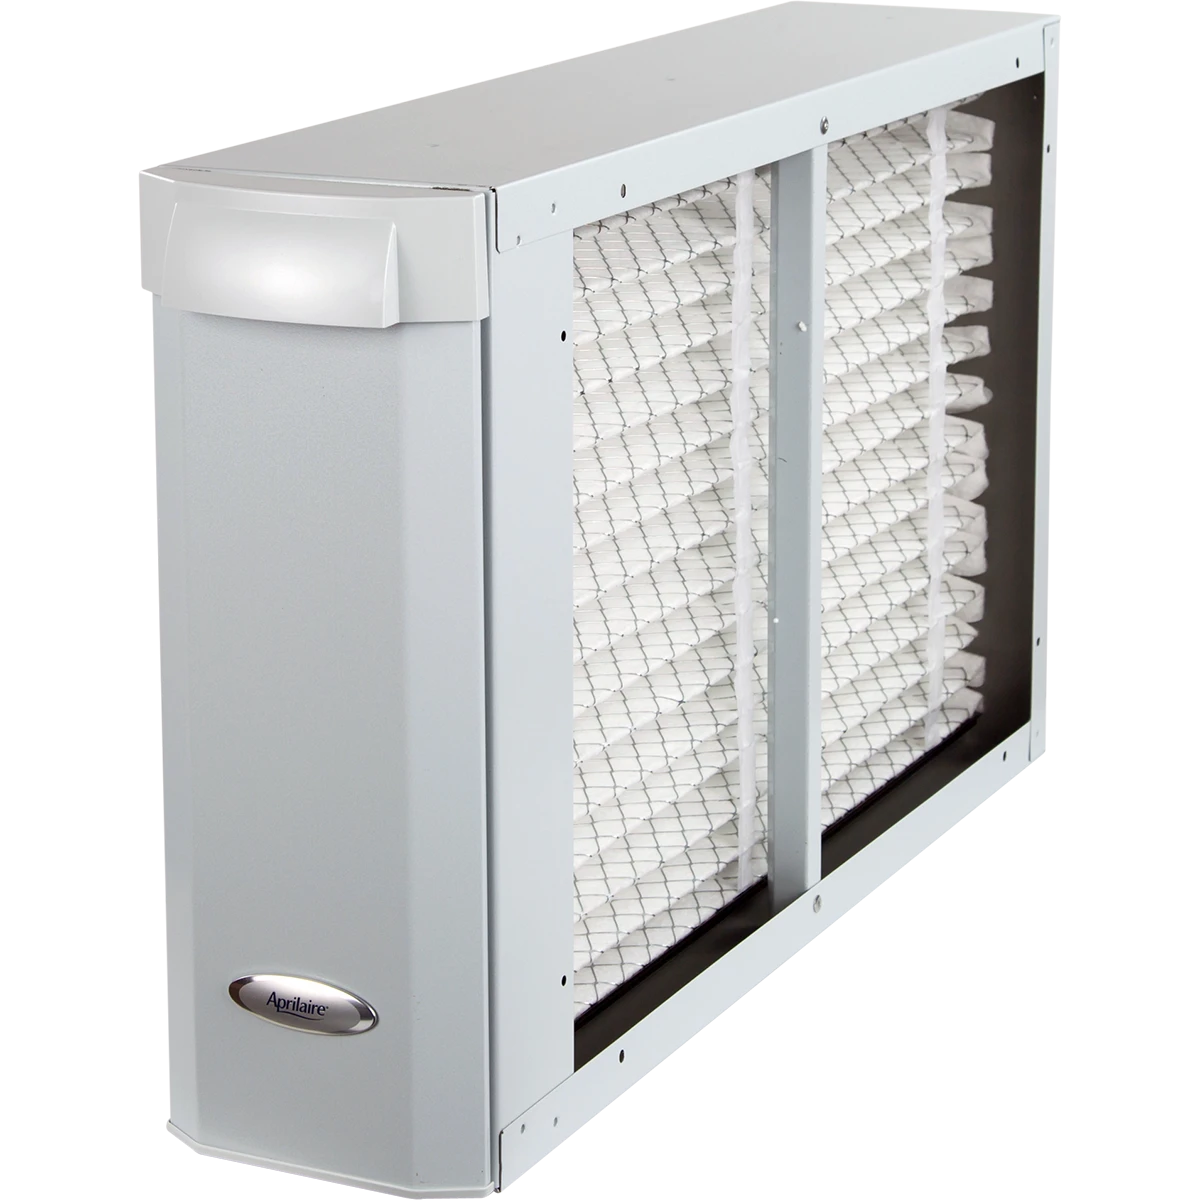 aprilaire-2410-whole-house-air-cleaner-main